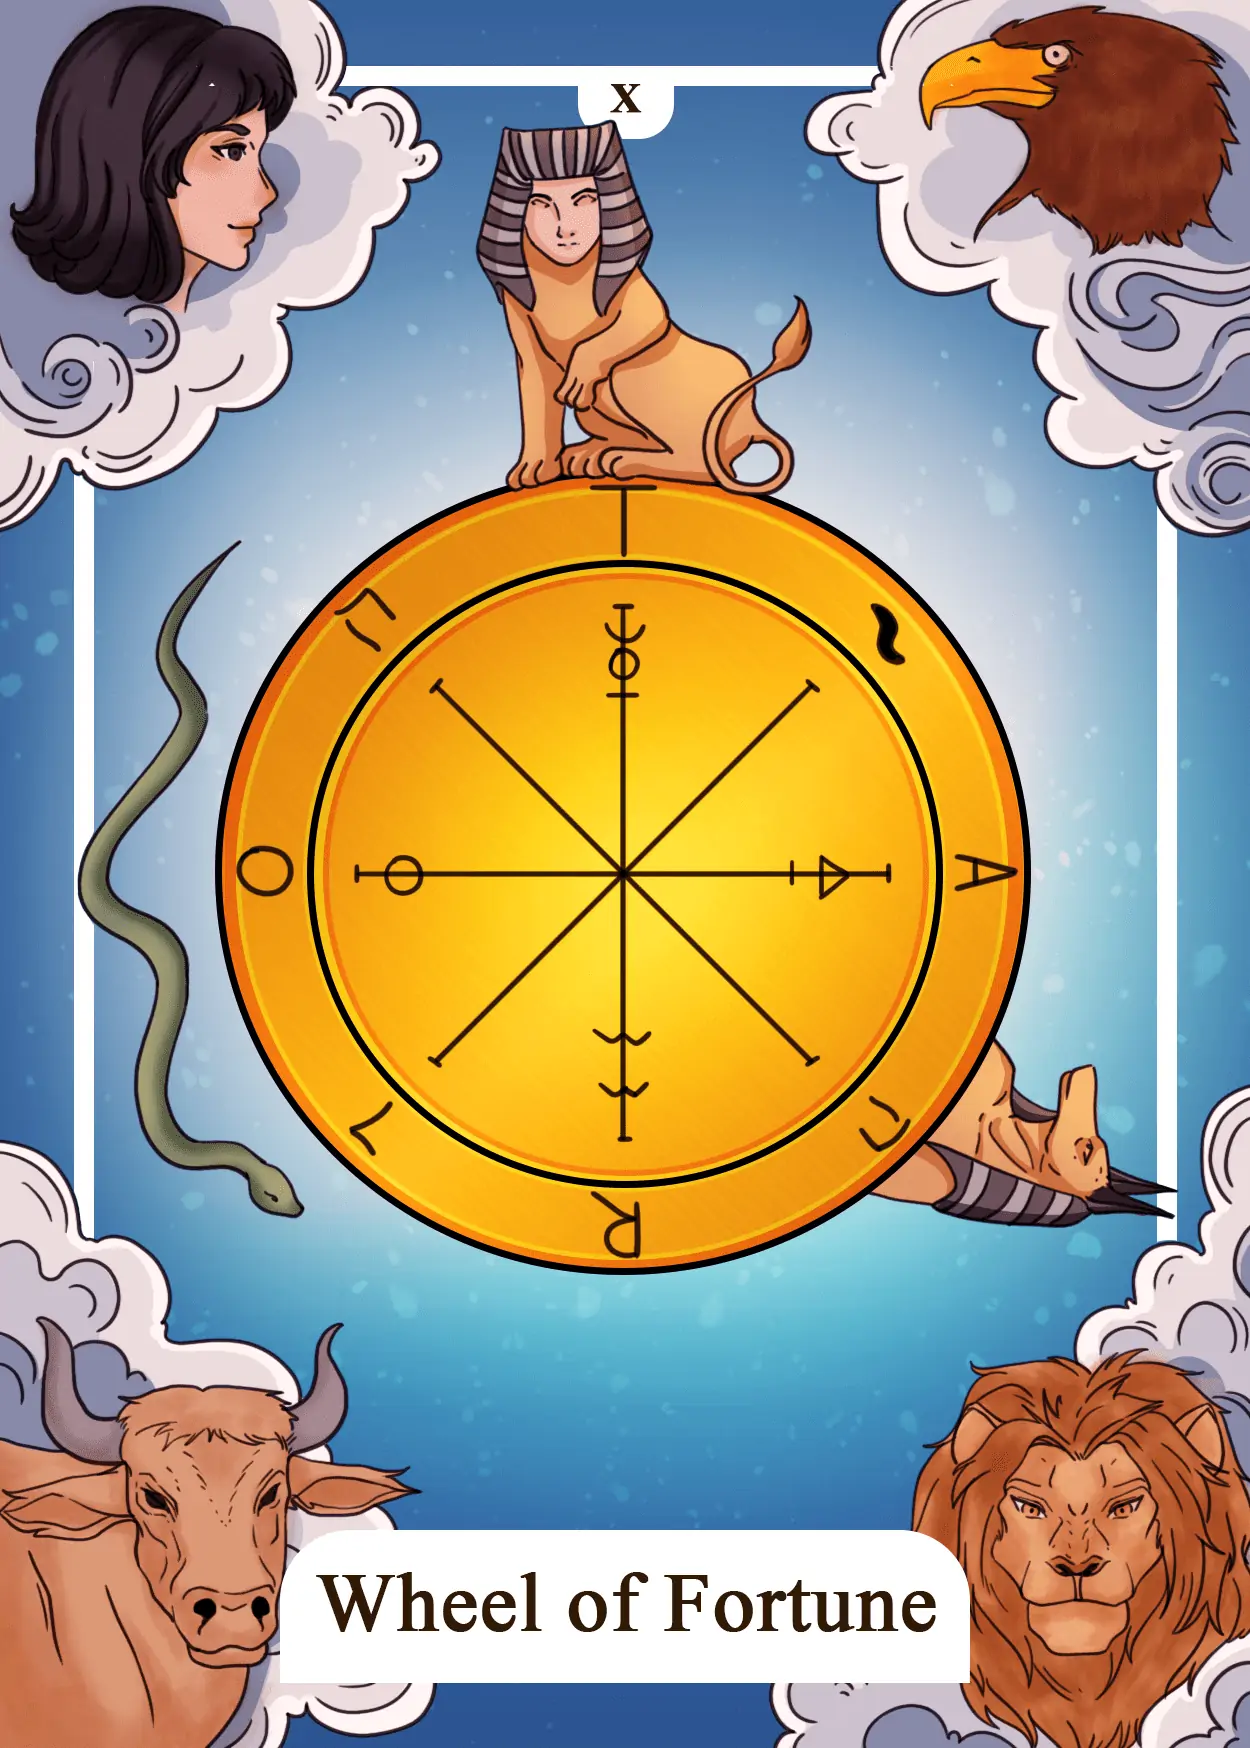 The Wheel of Fortune Tarot Card Meaning